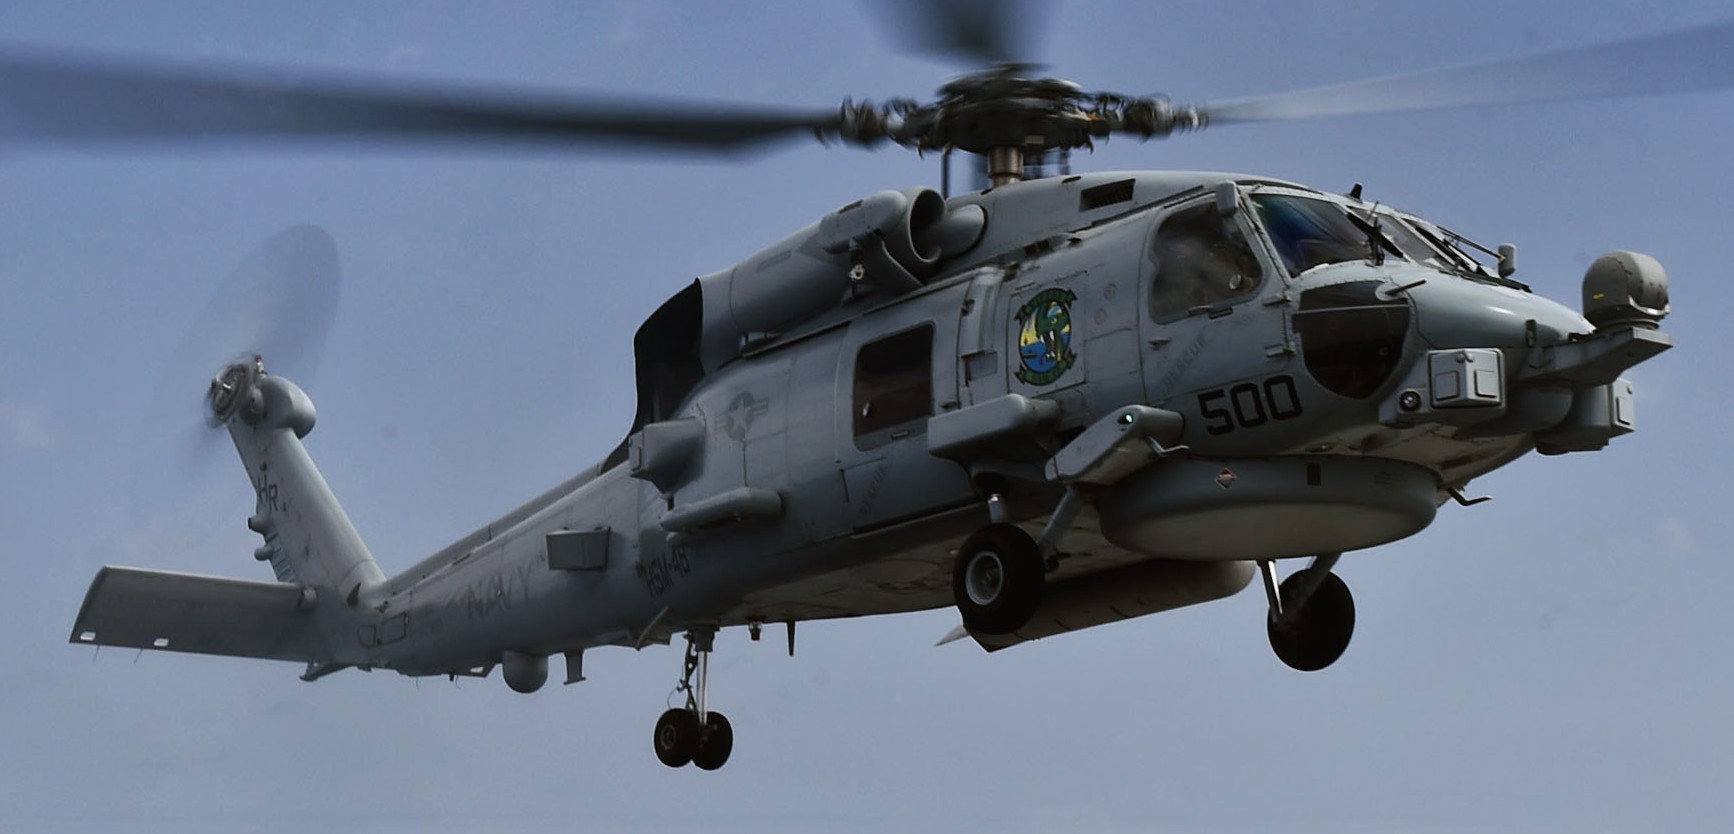 hsm-48 vipers helicopter maritime strike squadron mh-60r seahawk 2015 30 uss porter ddg-78